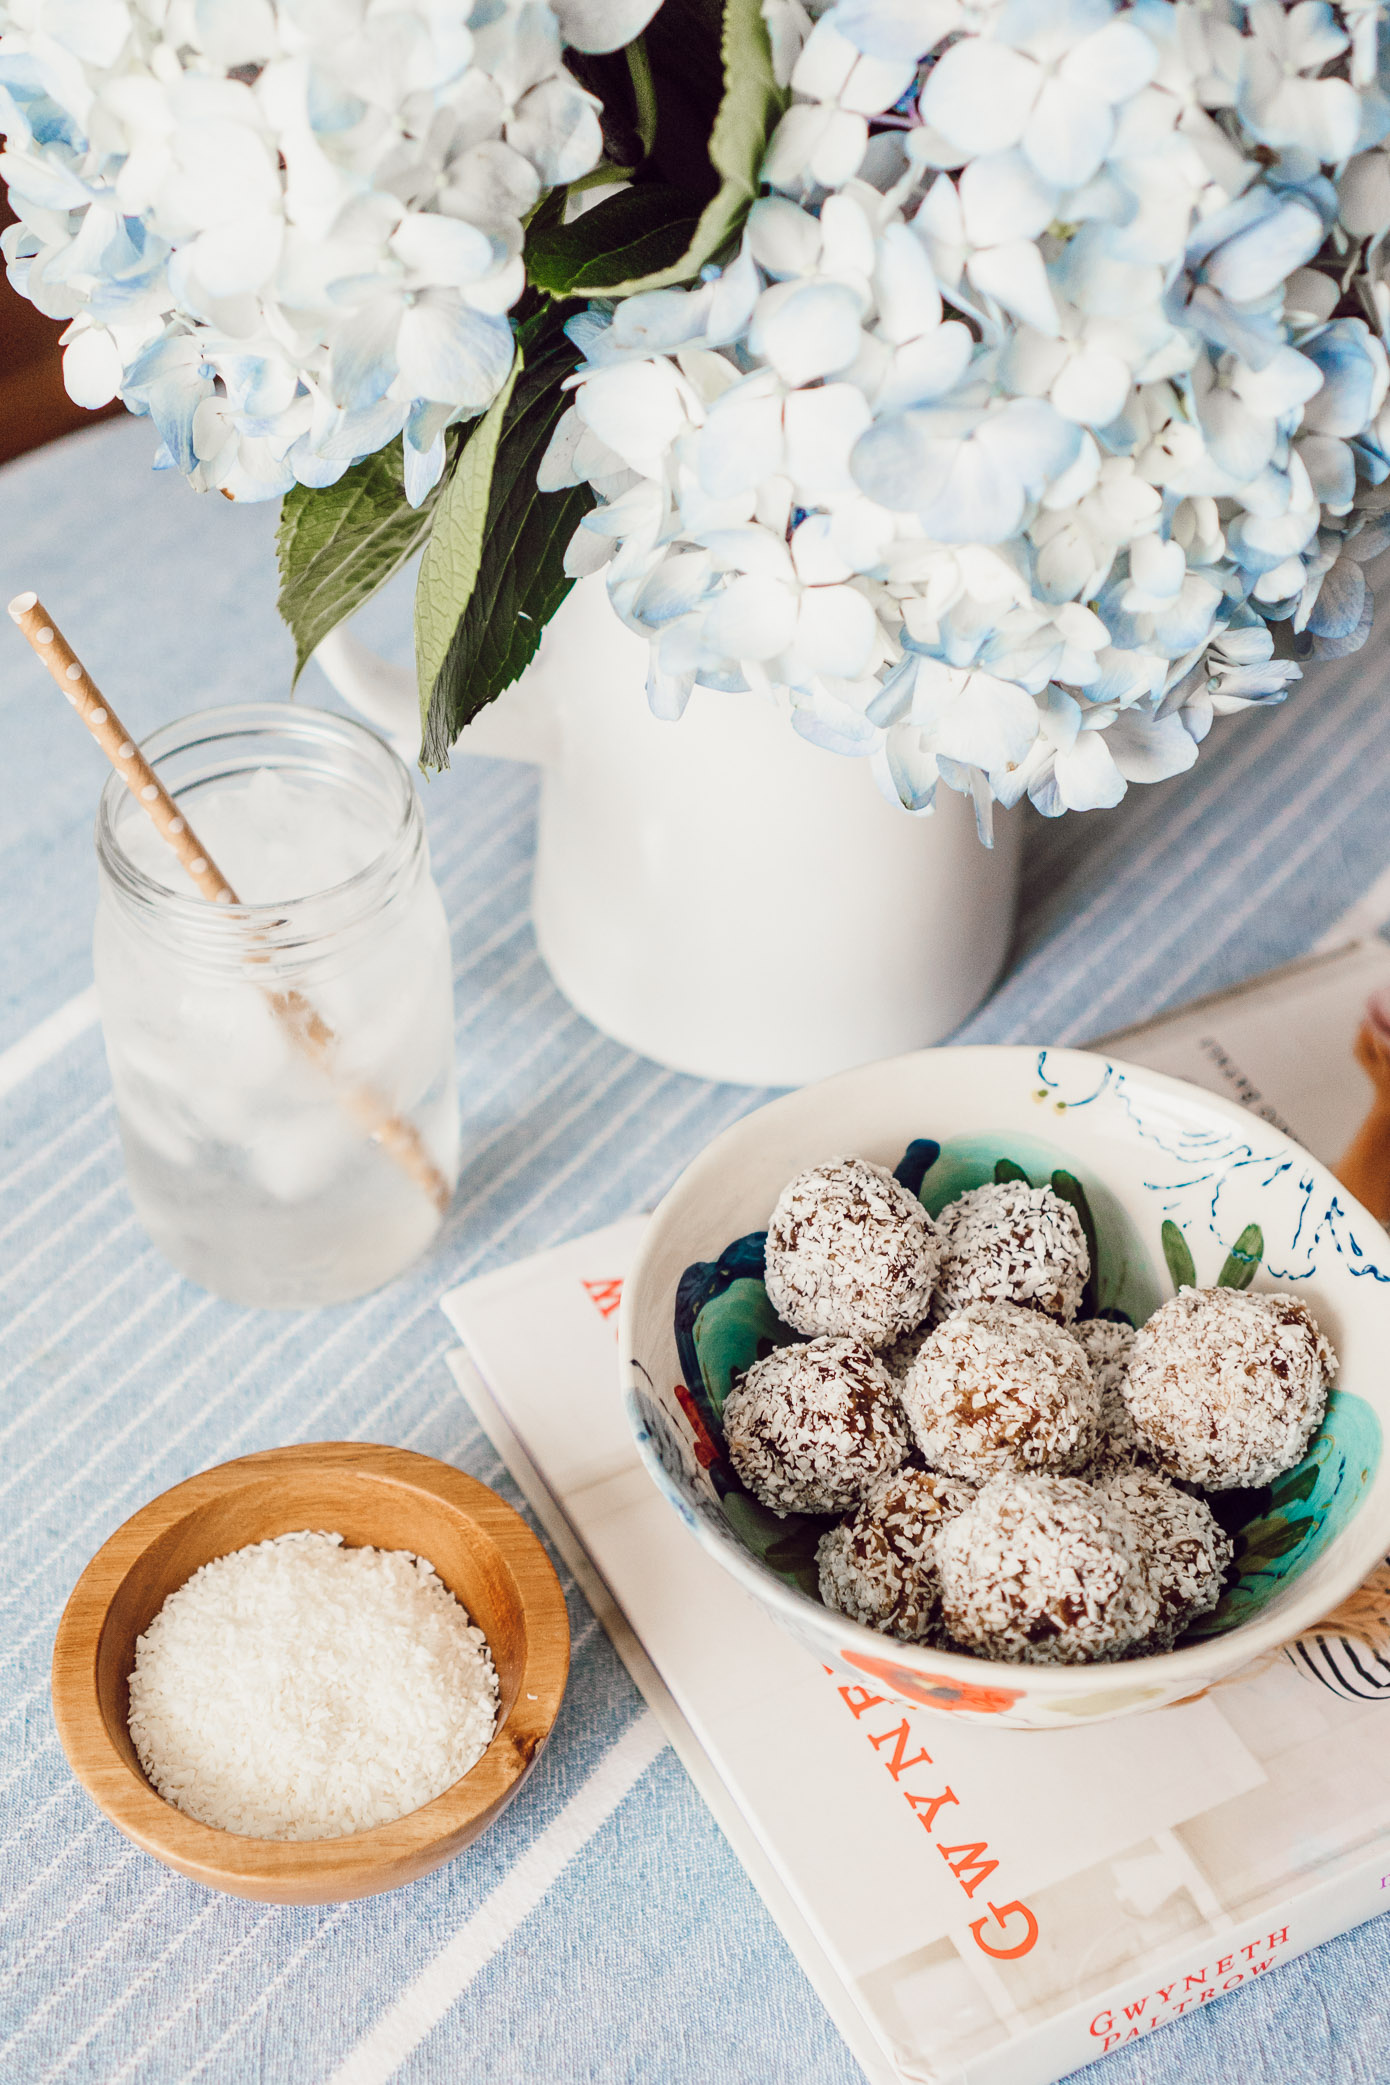 FWTFL Approved Low Carb Snacks & Regular Macro Day Snacks featured on Louella Reese Life & Style Blog | Whole Foods Coconut Date Ball Dupe